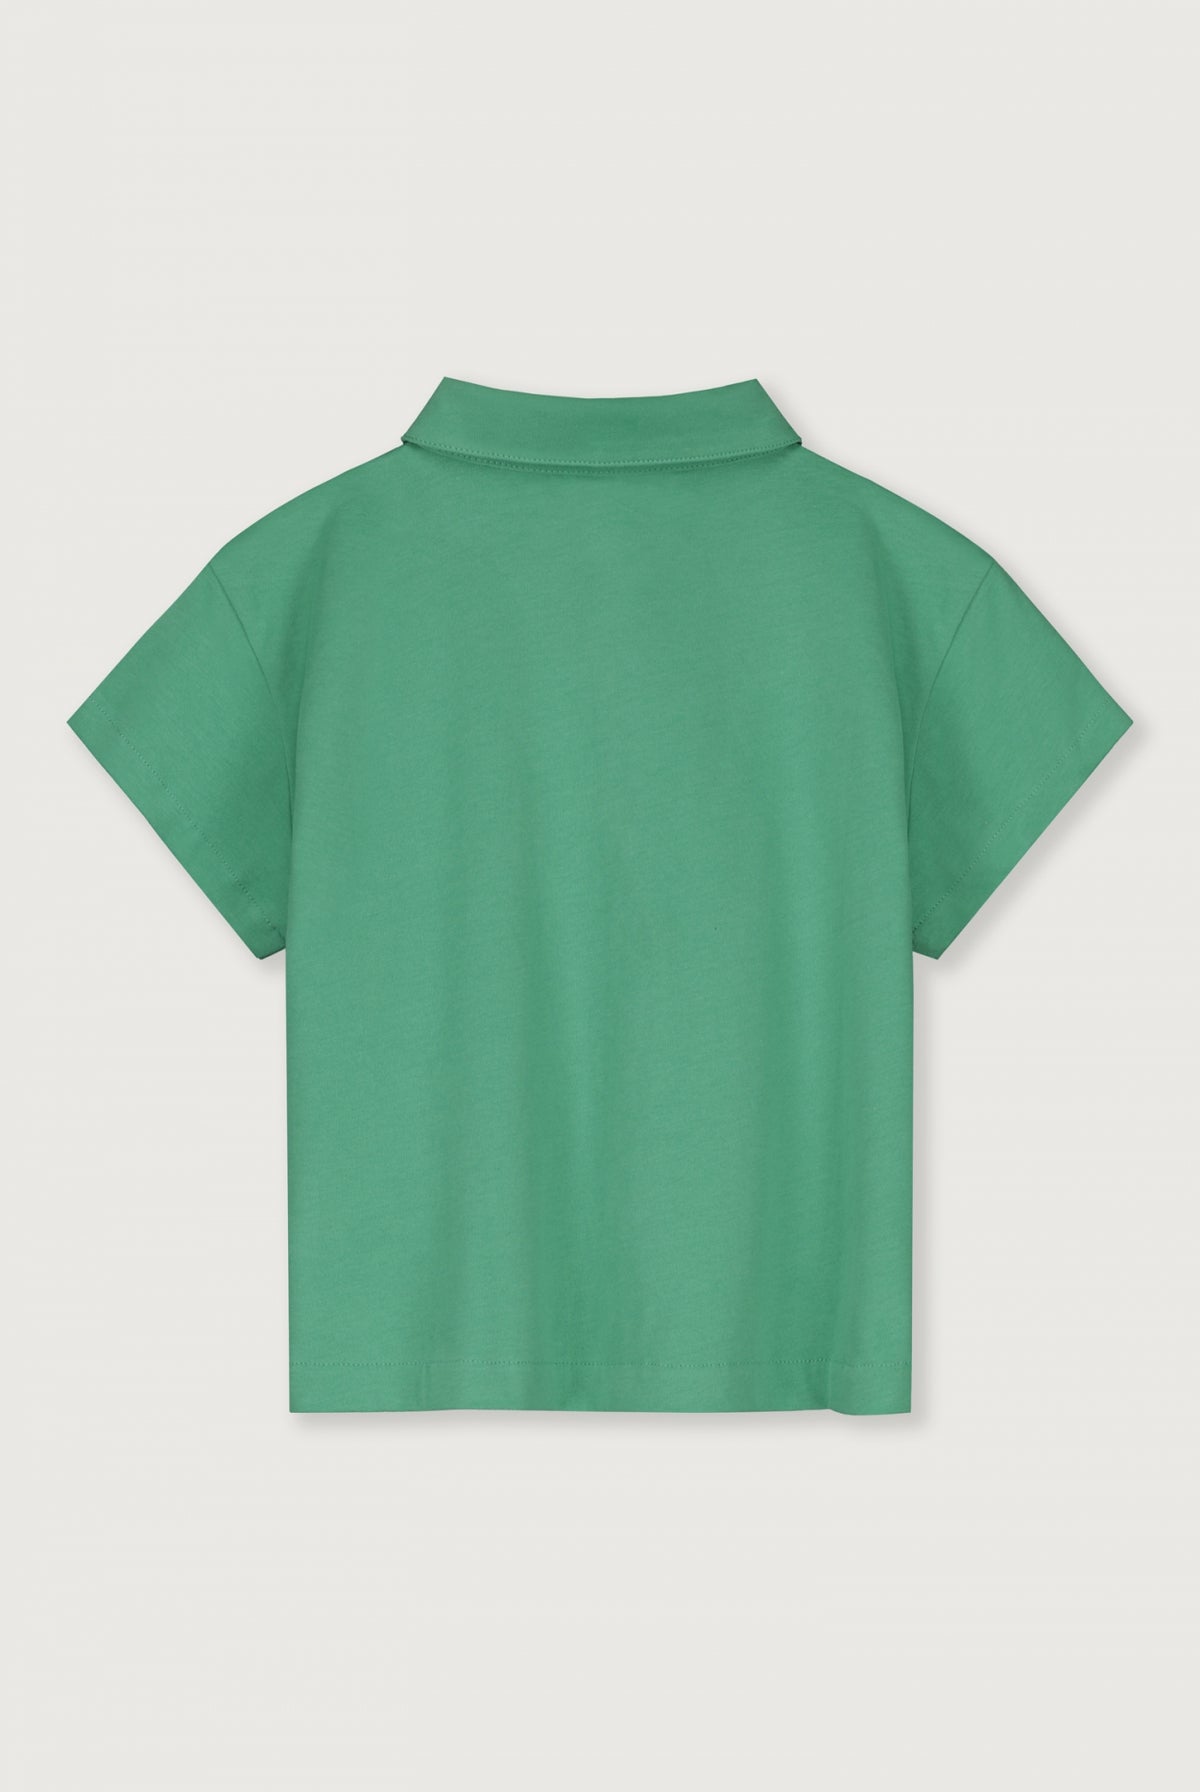 S/S Blouse Top Bright Green